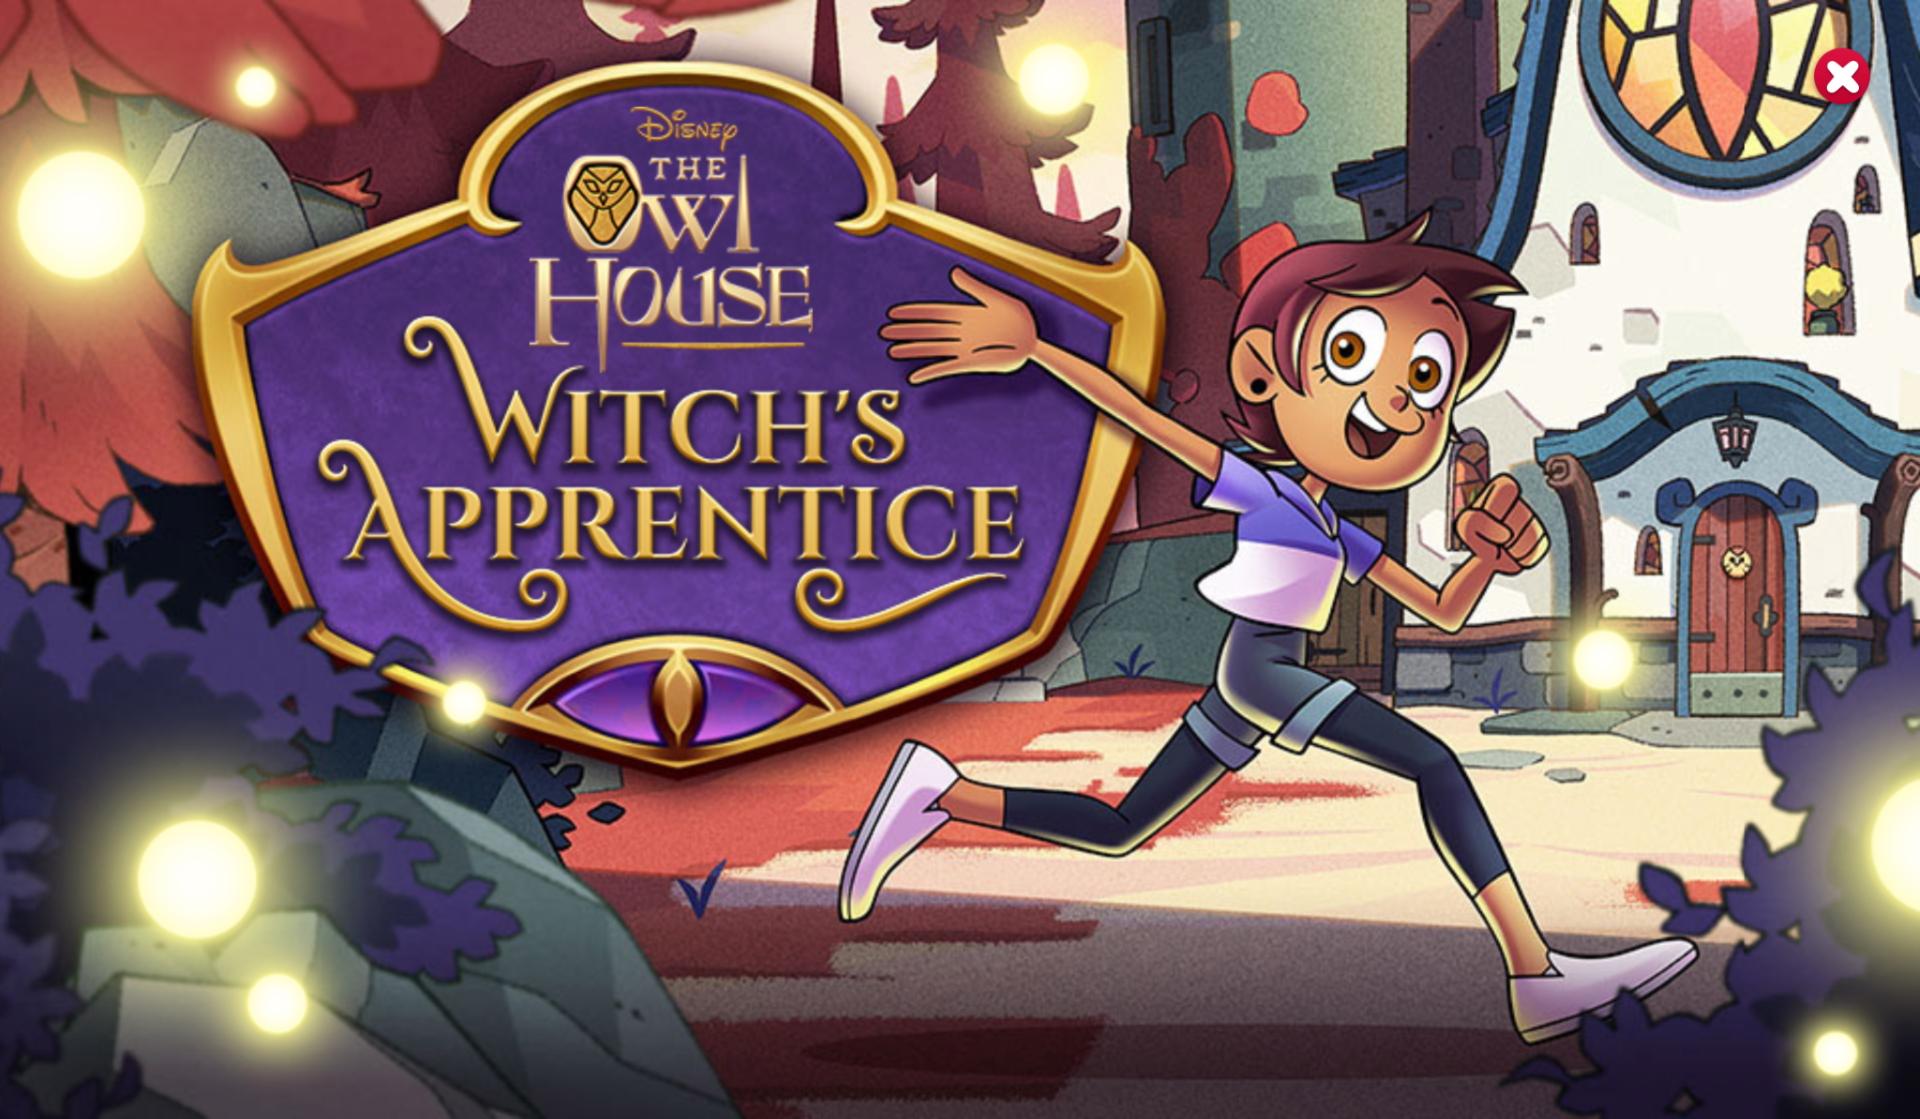 video game, the owl house: witch's apprentice, luz noceda